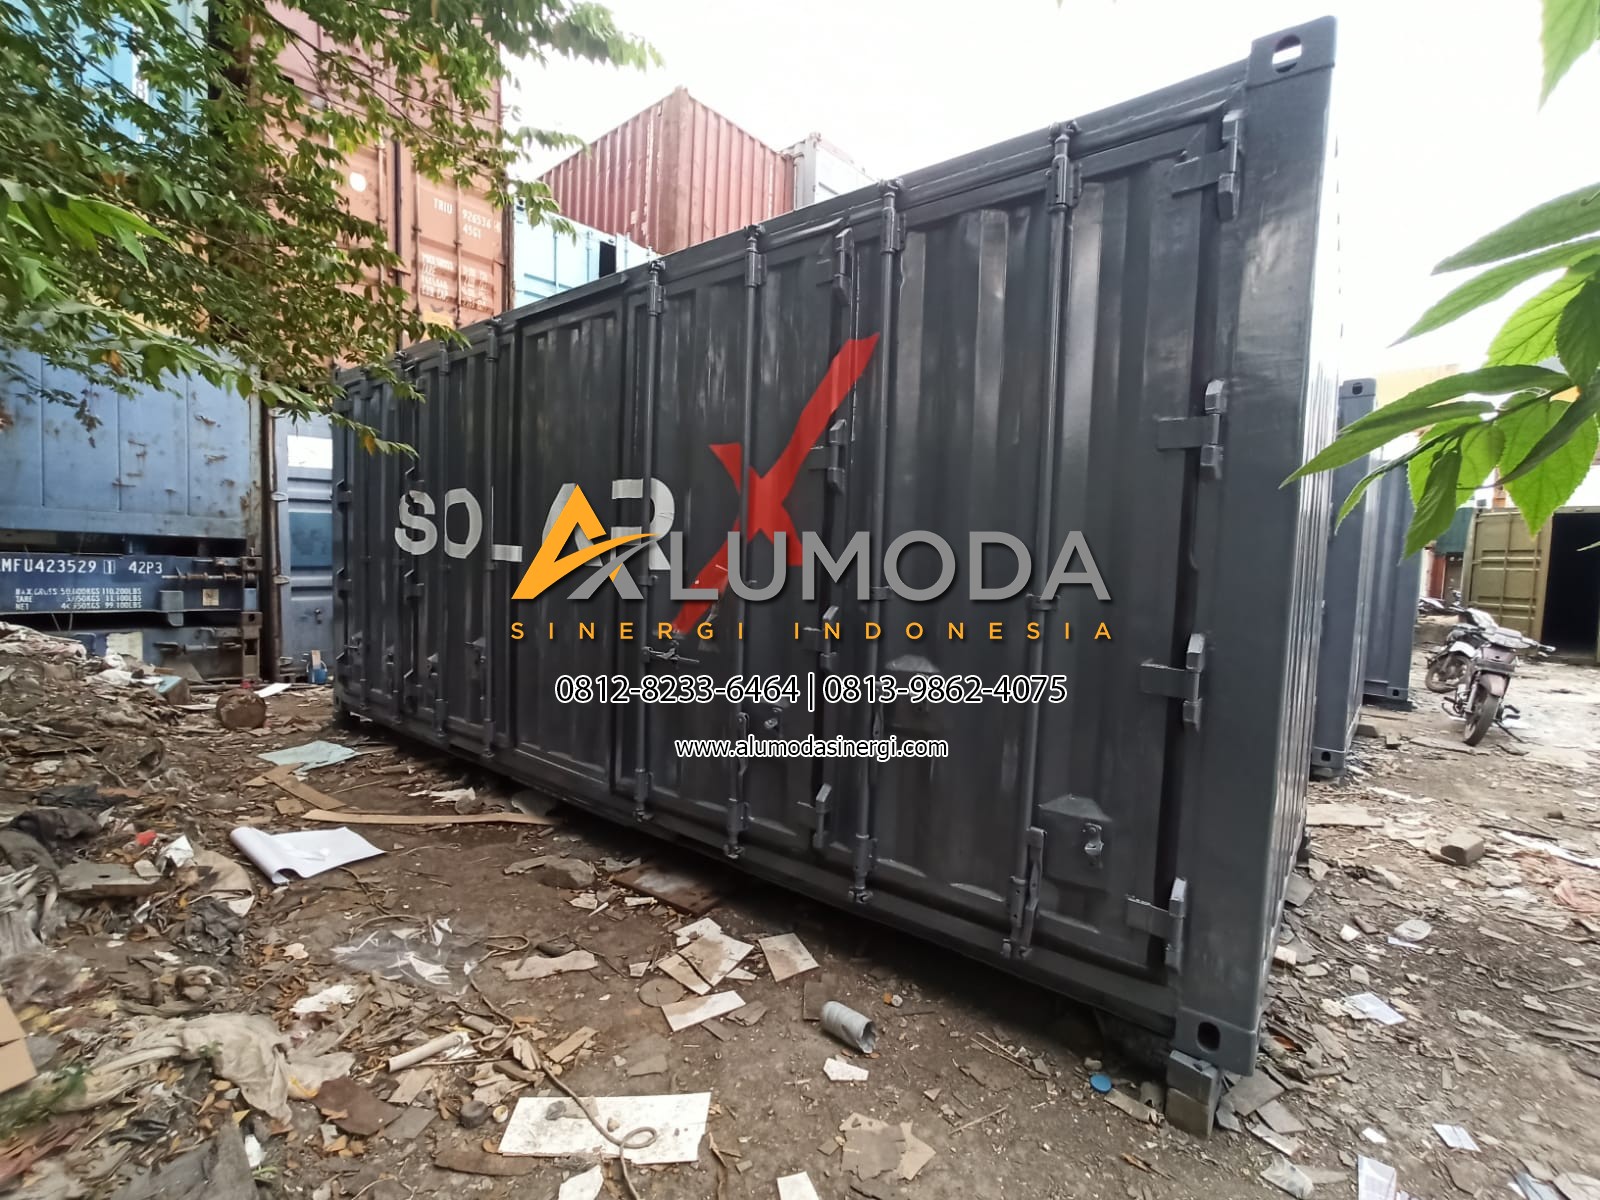 Modifikasi Open One Side container